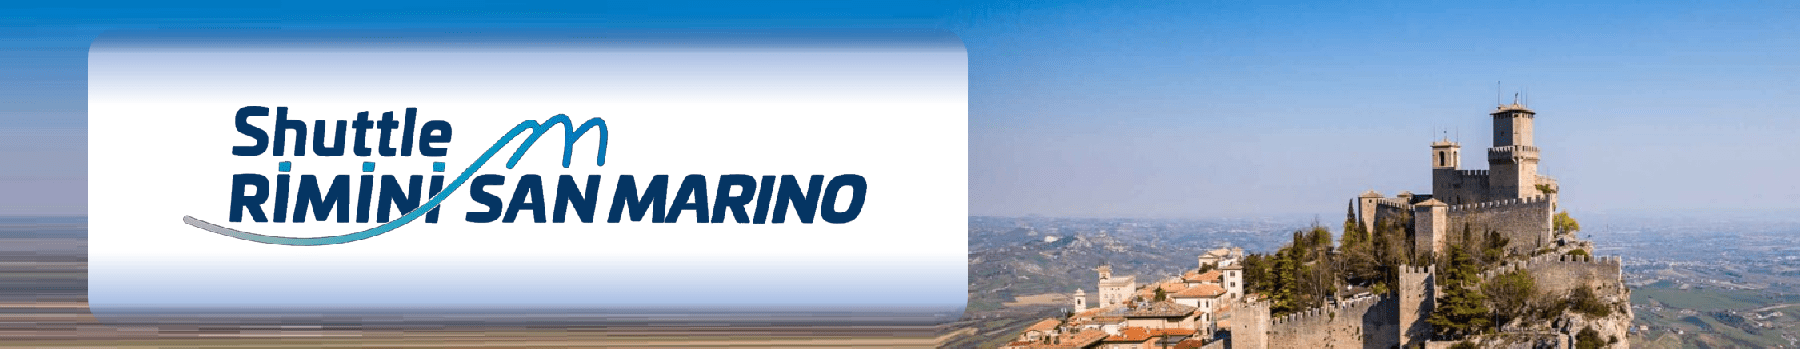 Daily connections between Rimini and San Marino by Bus